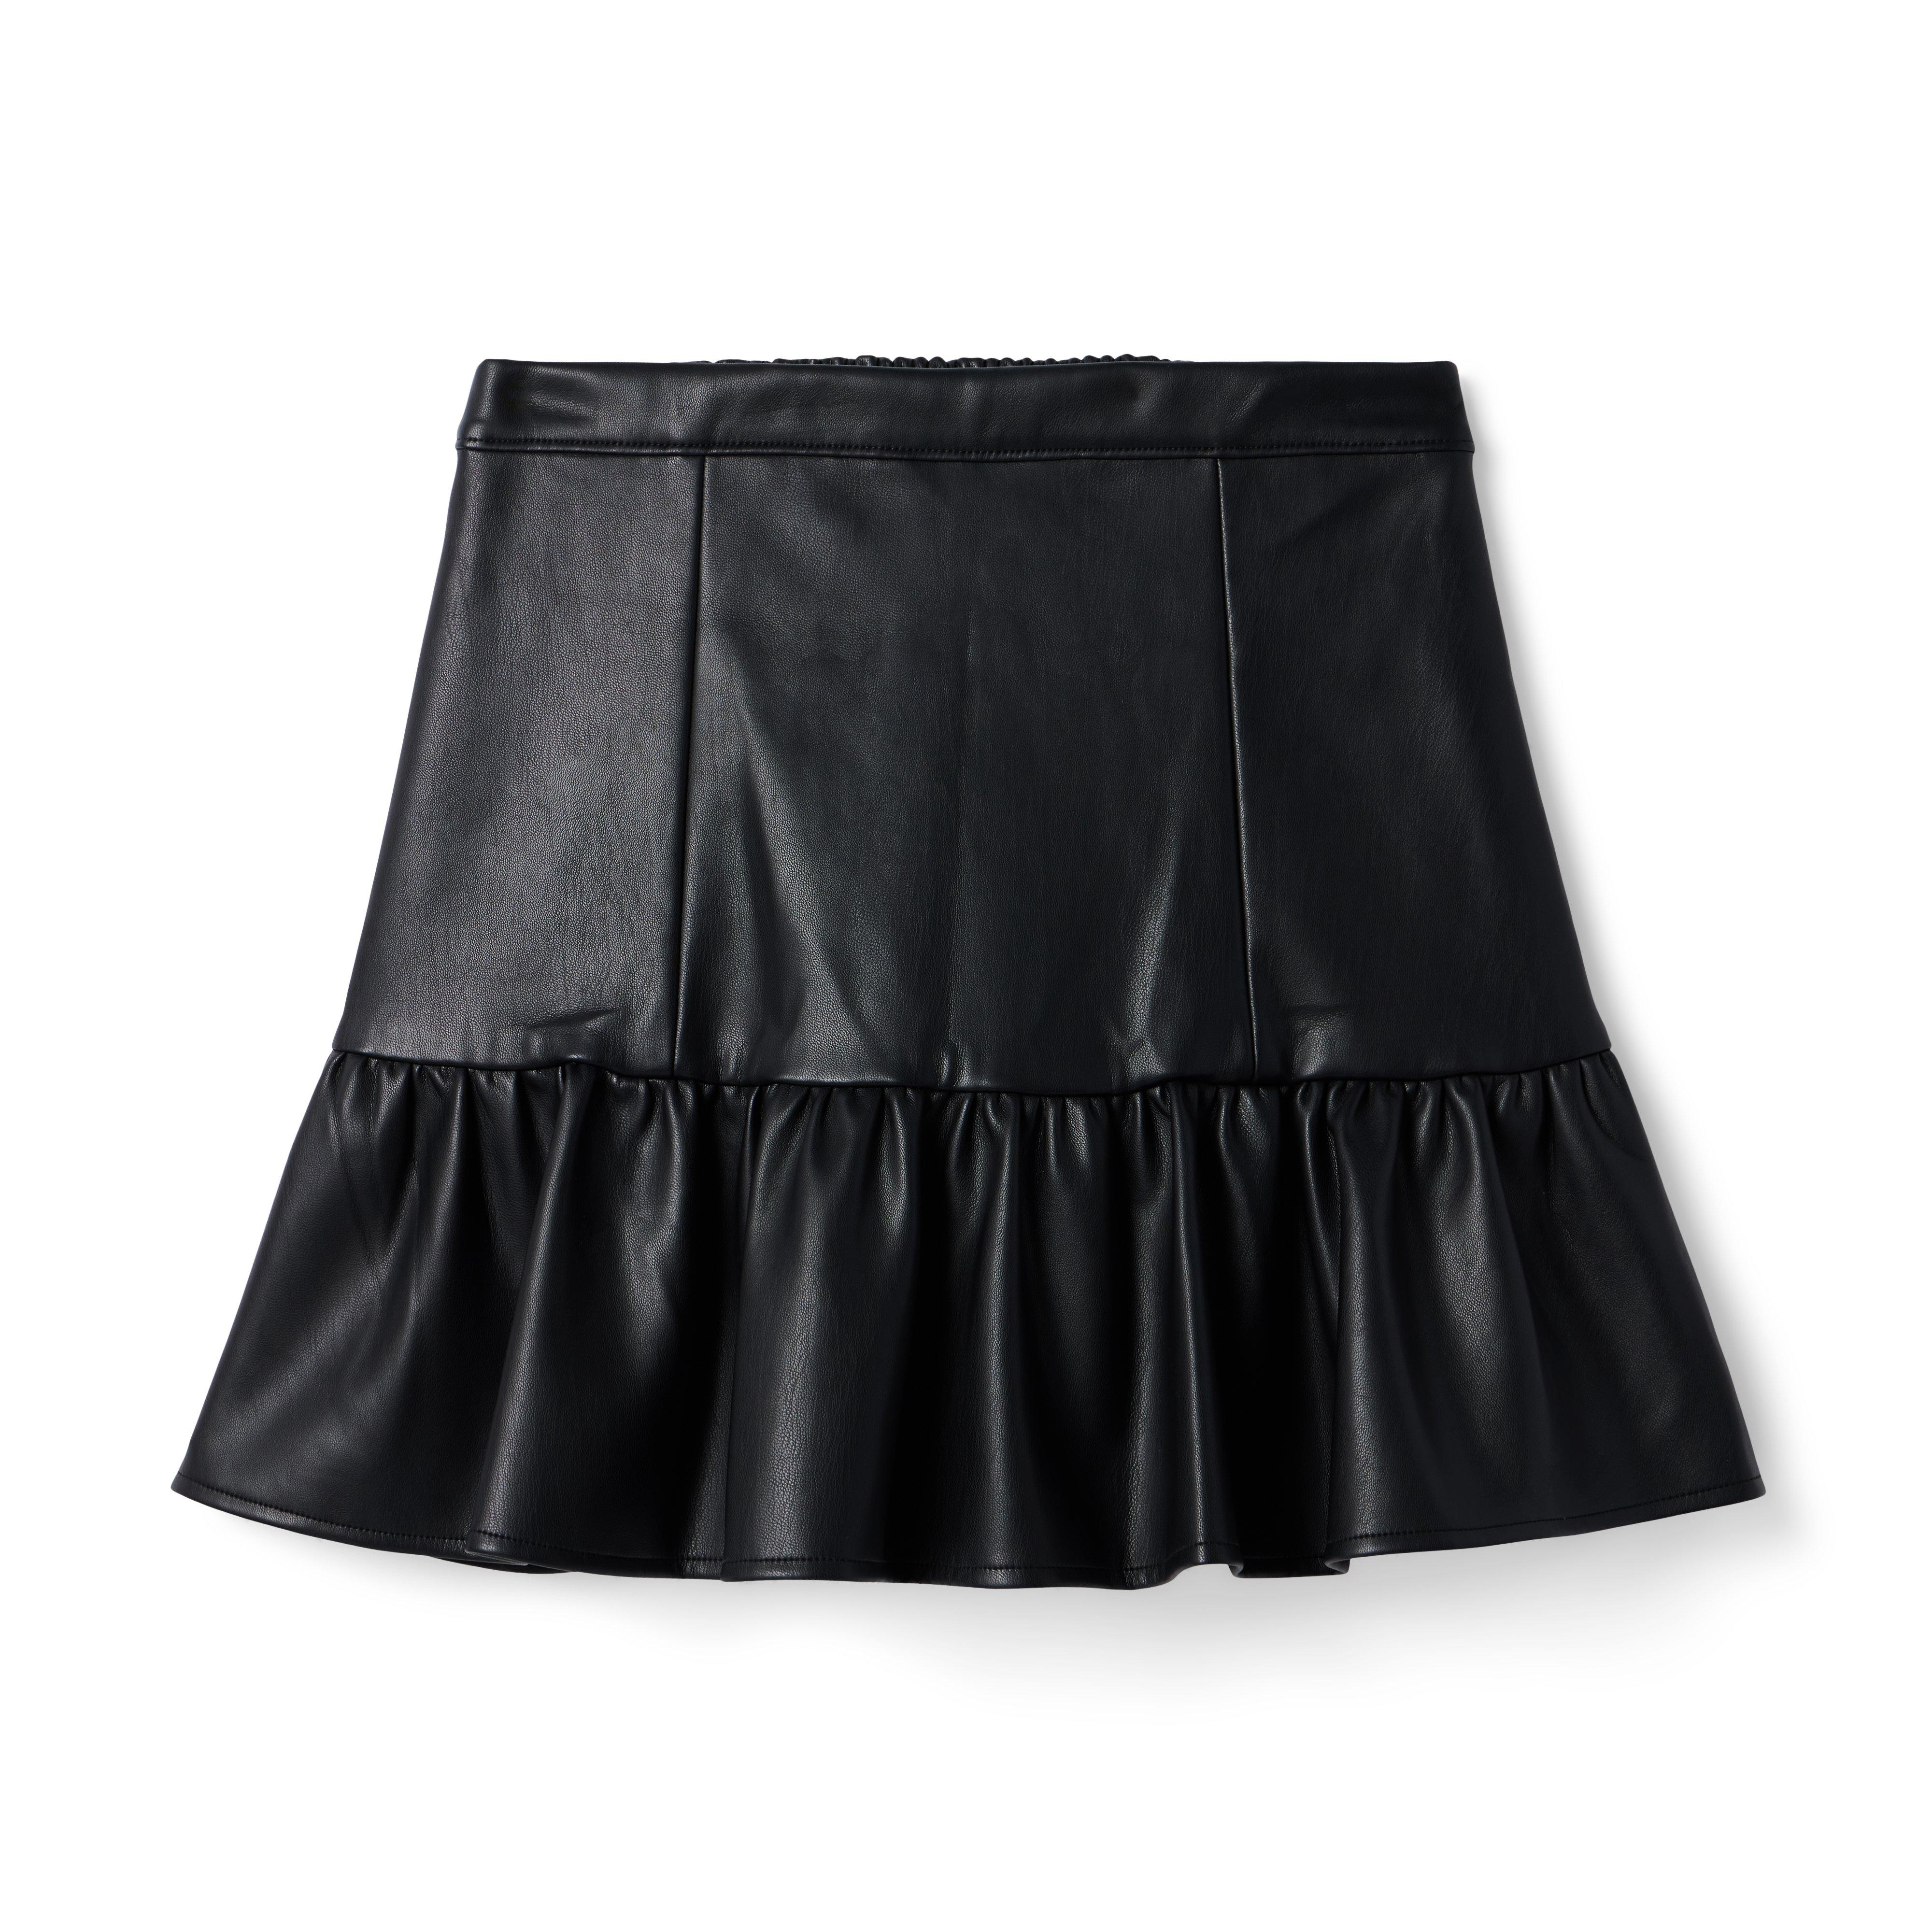 The Faux Leather Ruffle Skirt